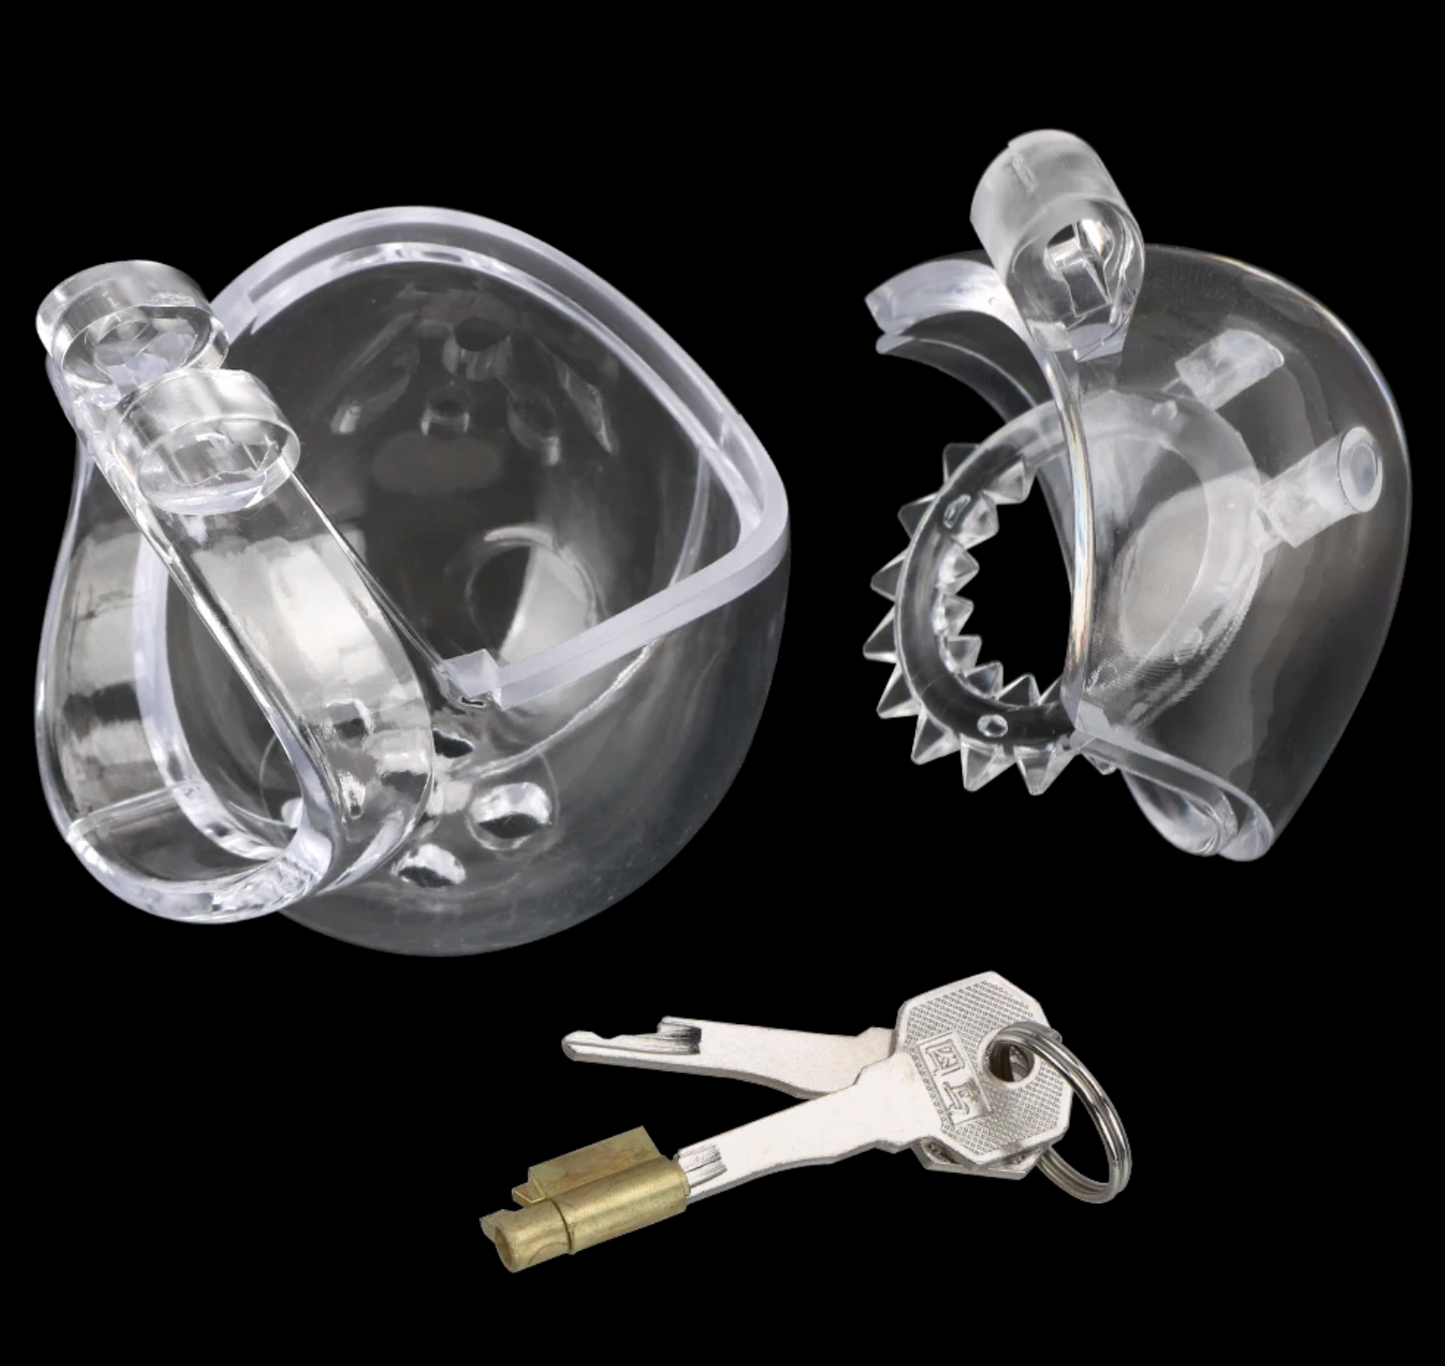 Fully Restrained Lockable Transparent Plastic Chastity Cage